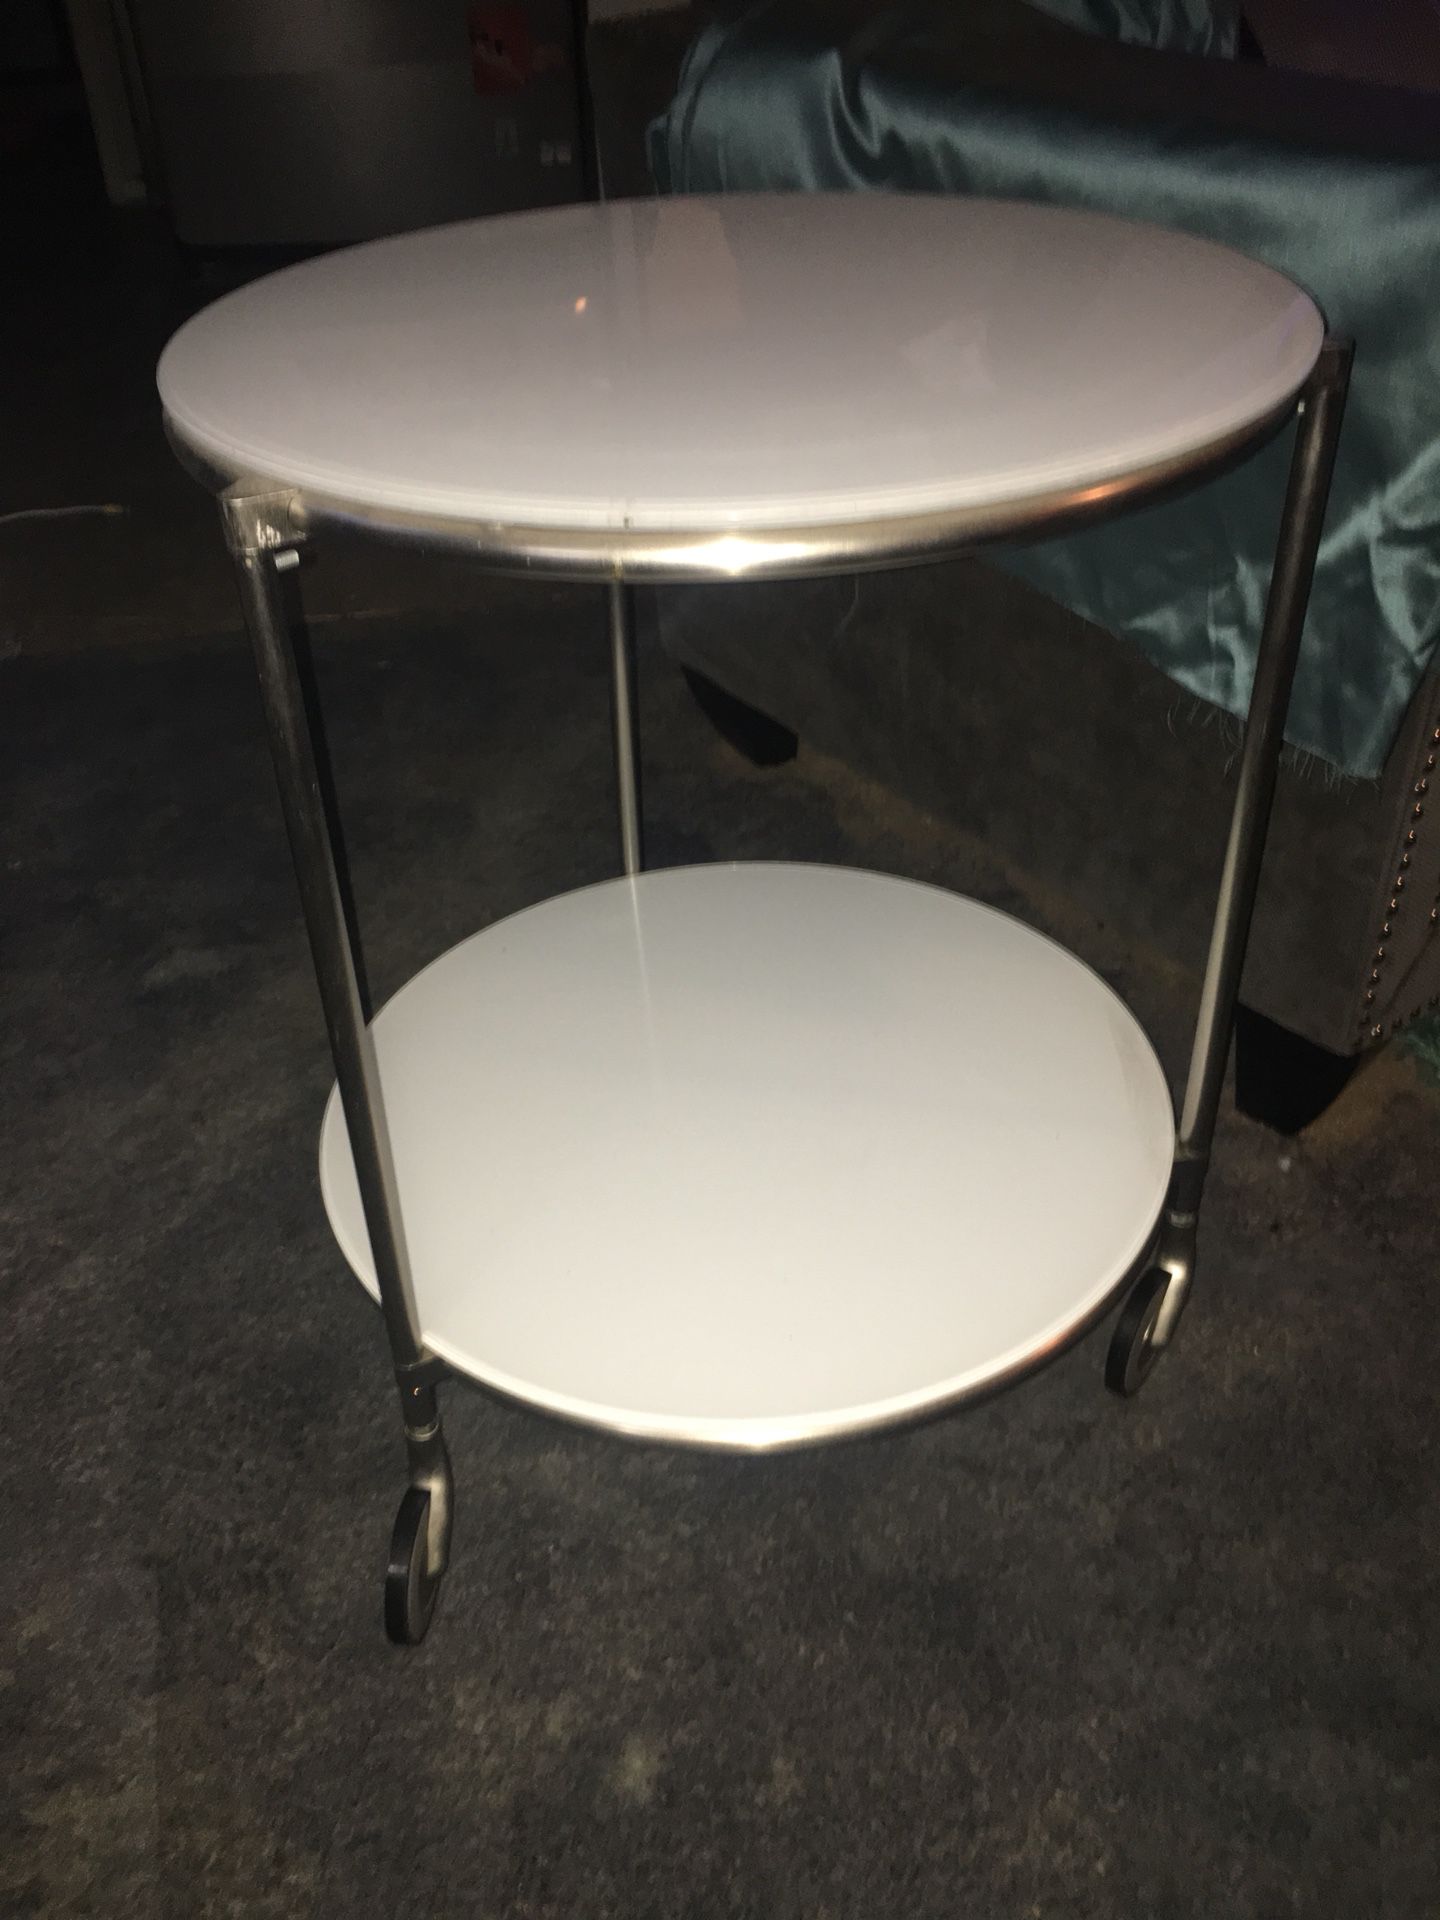 2 tier round white glass table on wheels